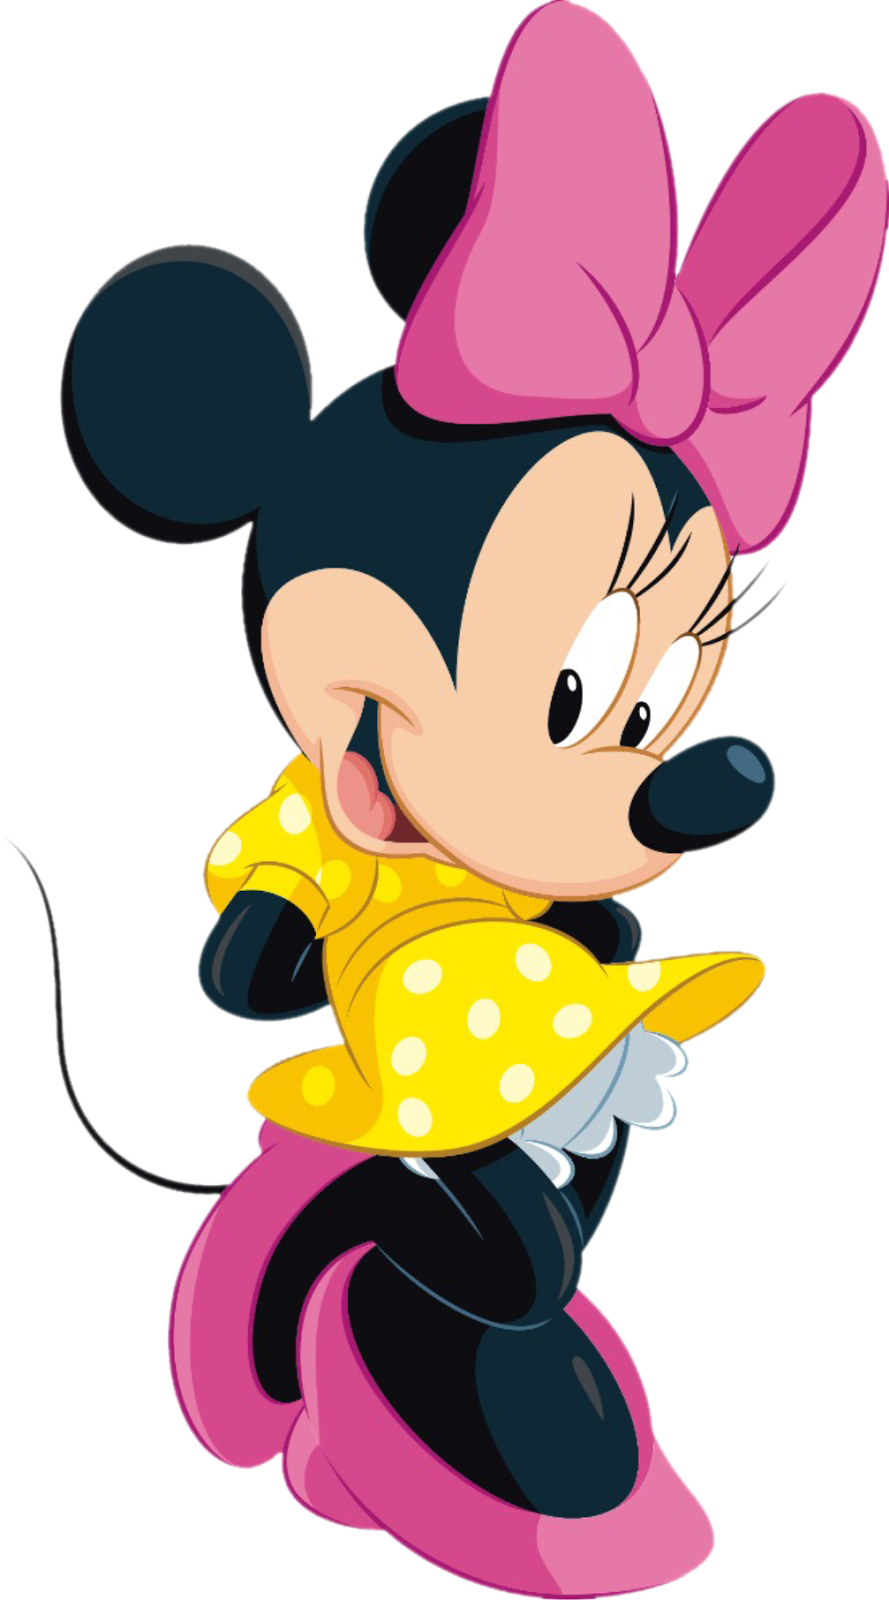 Pink Minnie Mouse Png - ClipArt Best